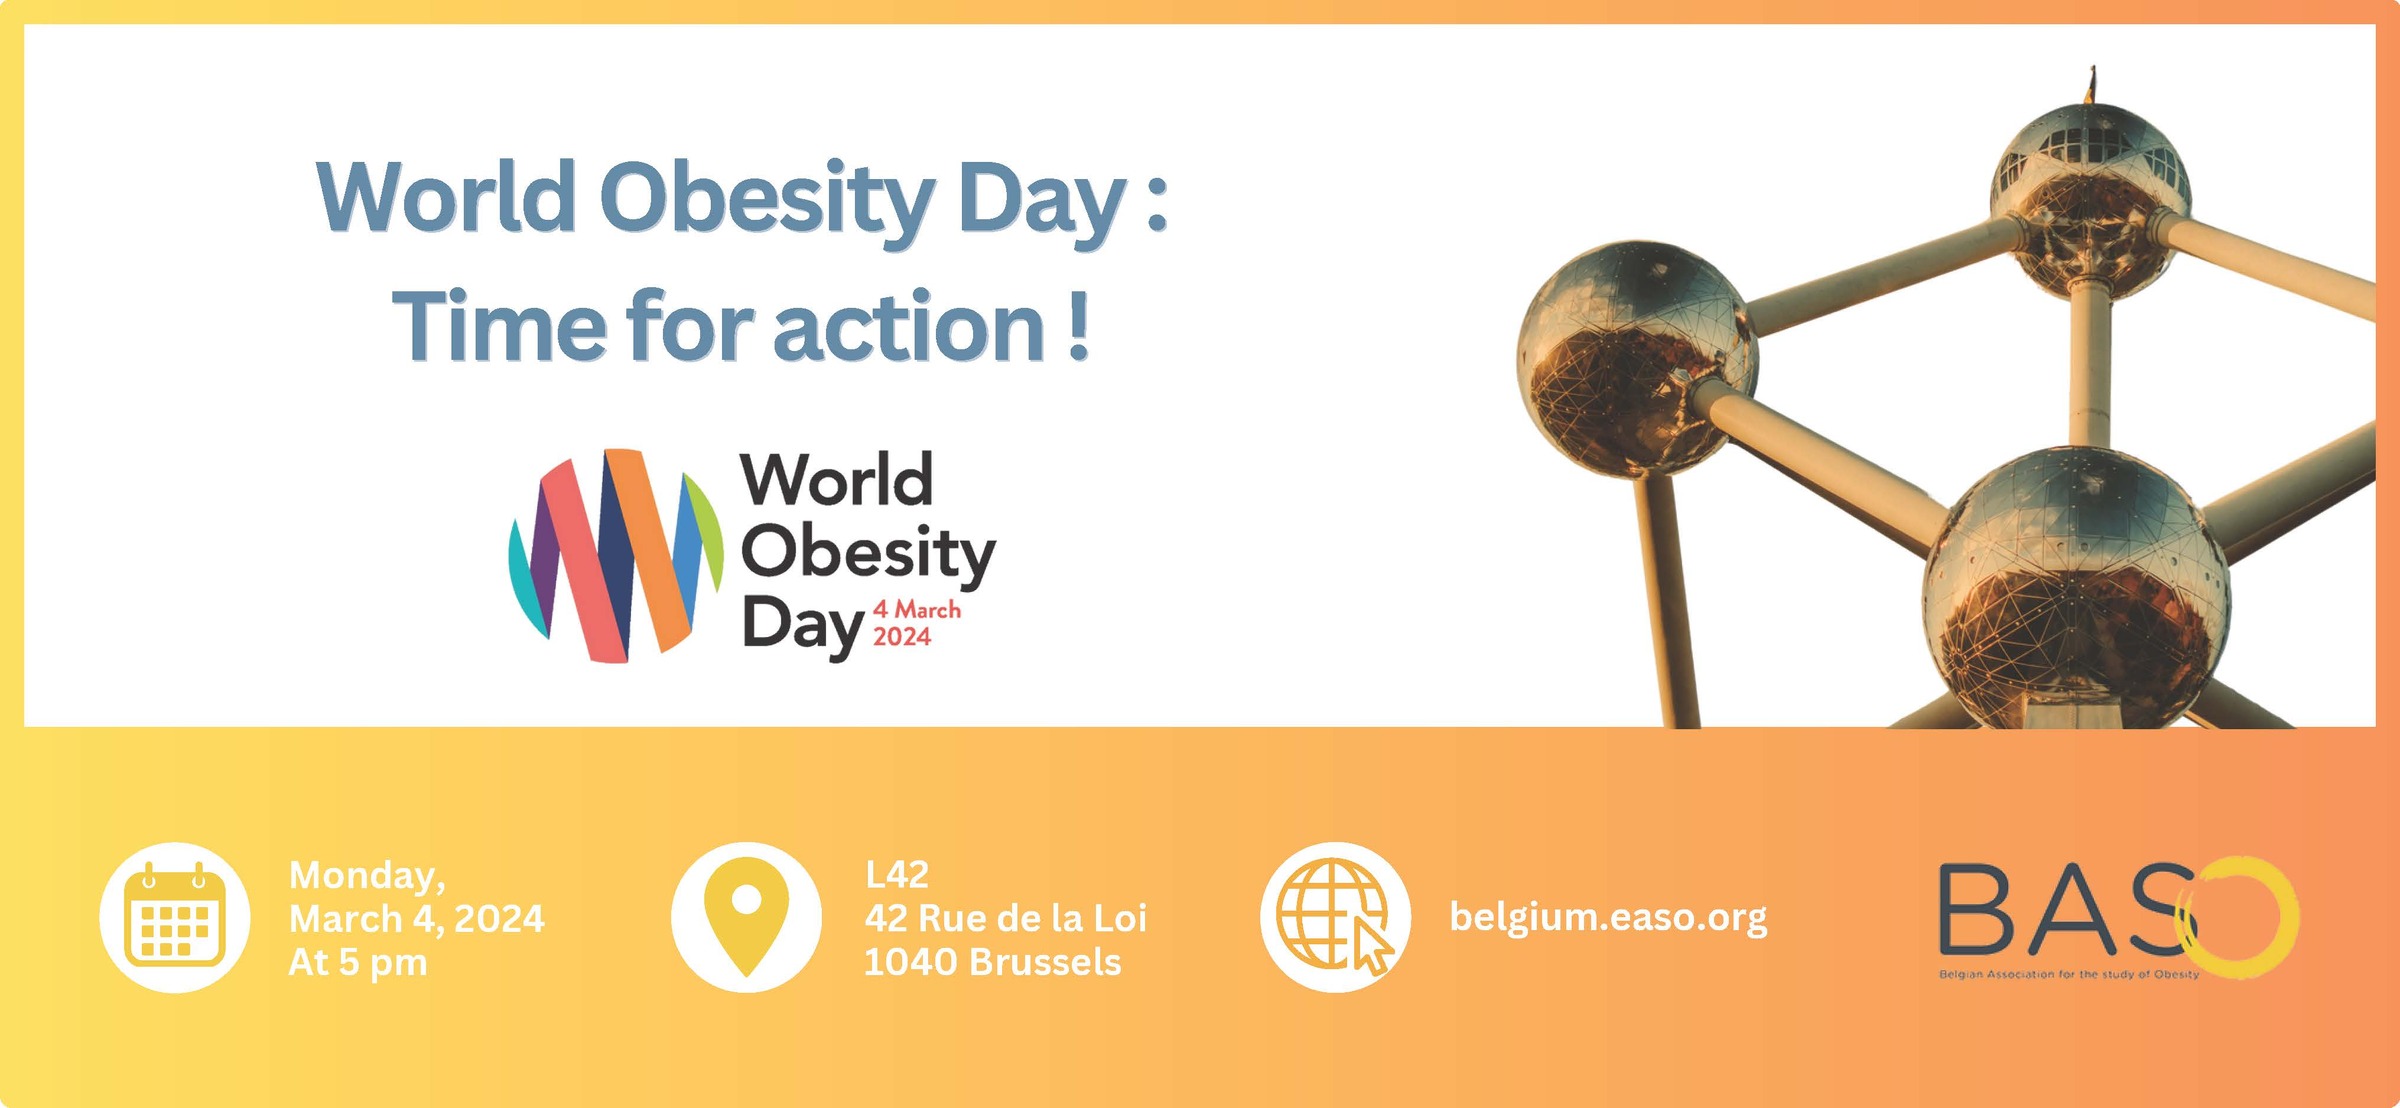 BASO - World Obesity Day: Time for action! - March 4, 2024